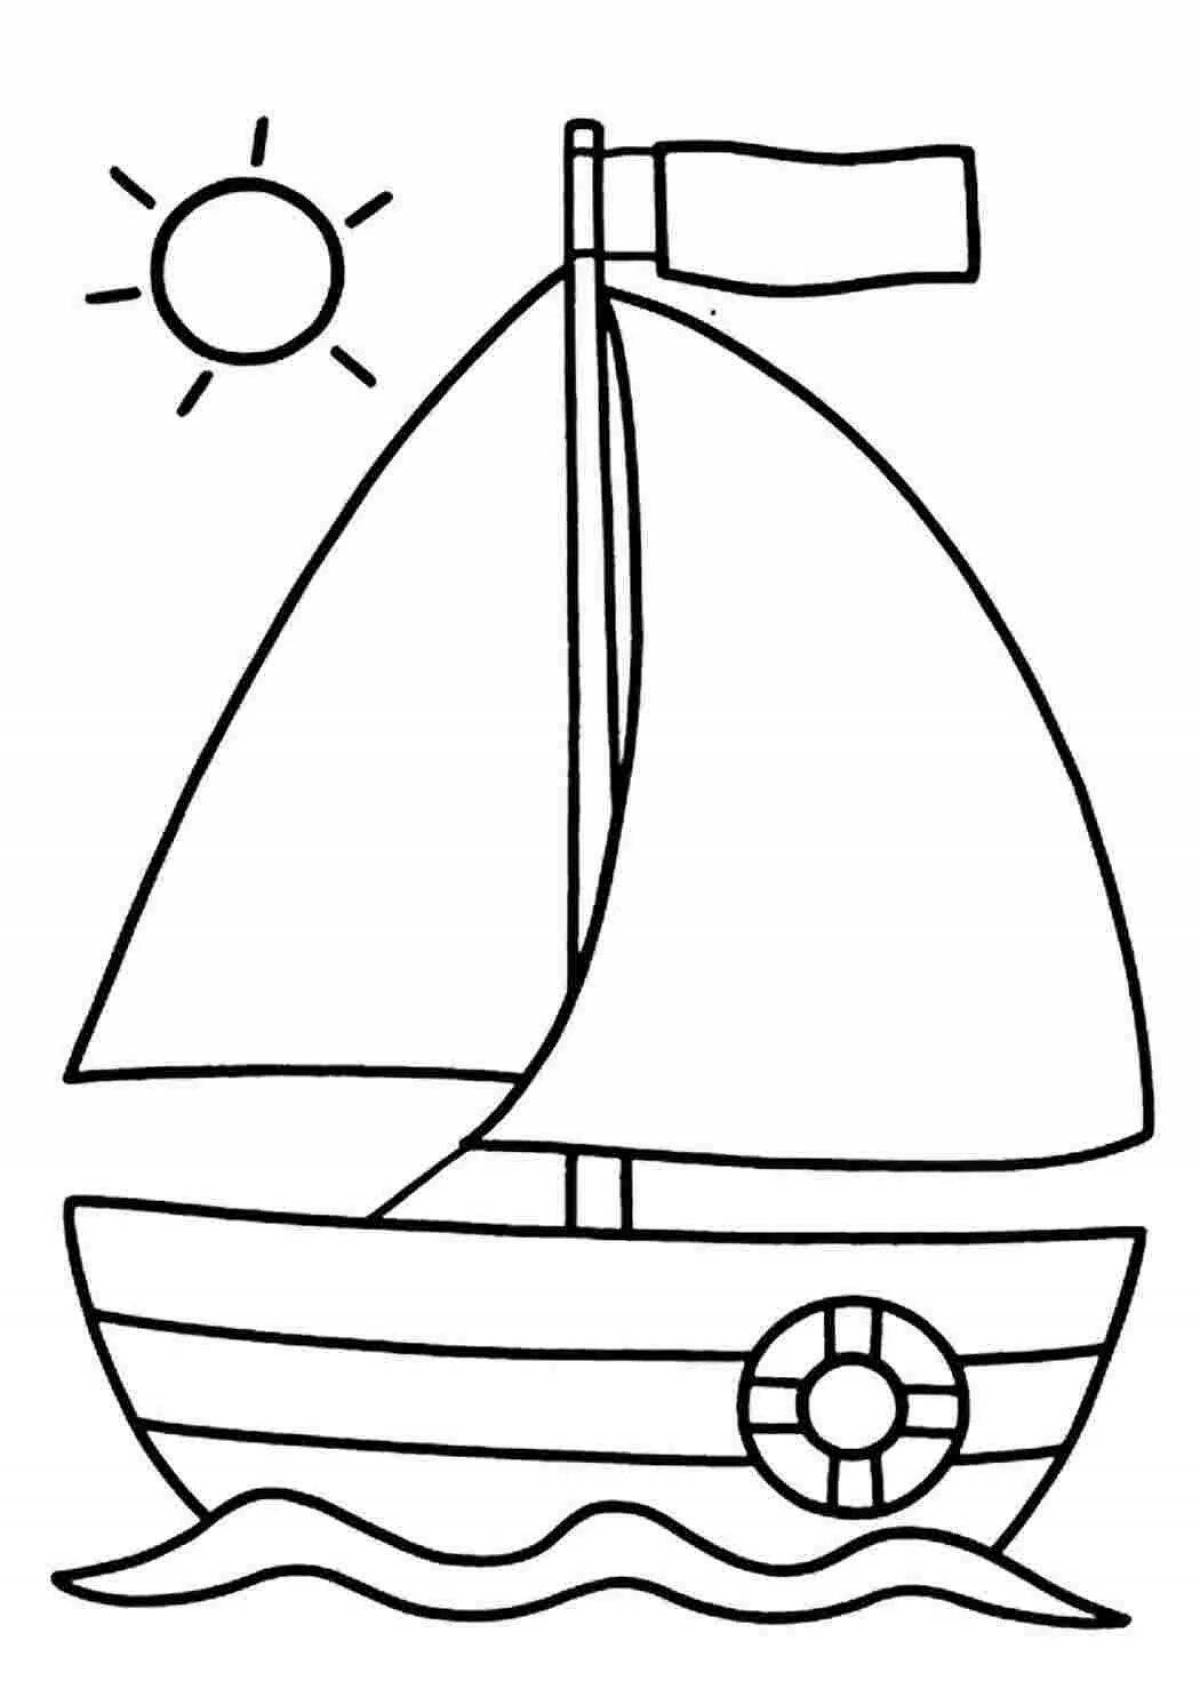 Spatter ship coloring book for kids